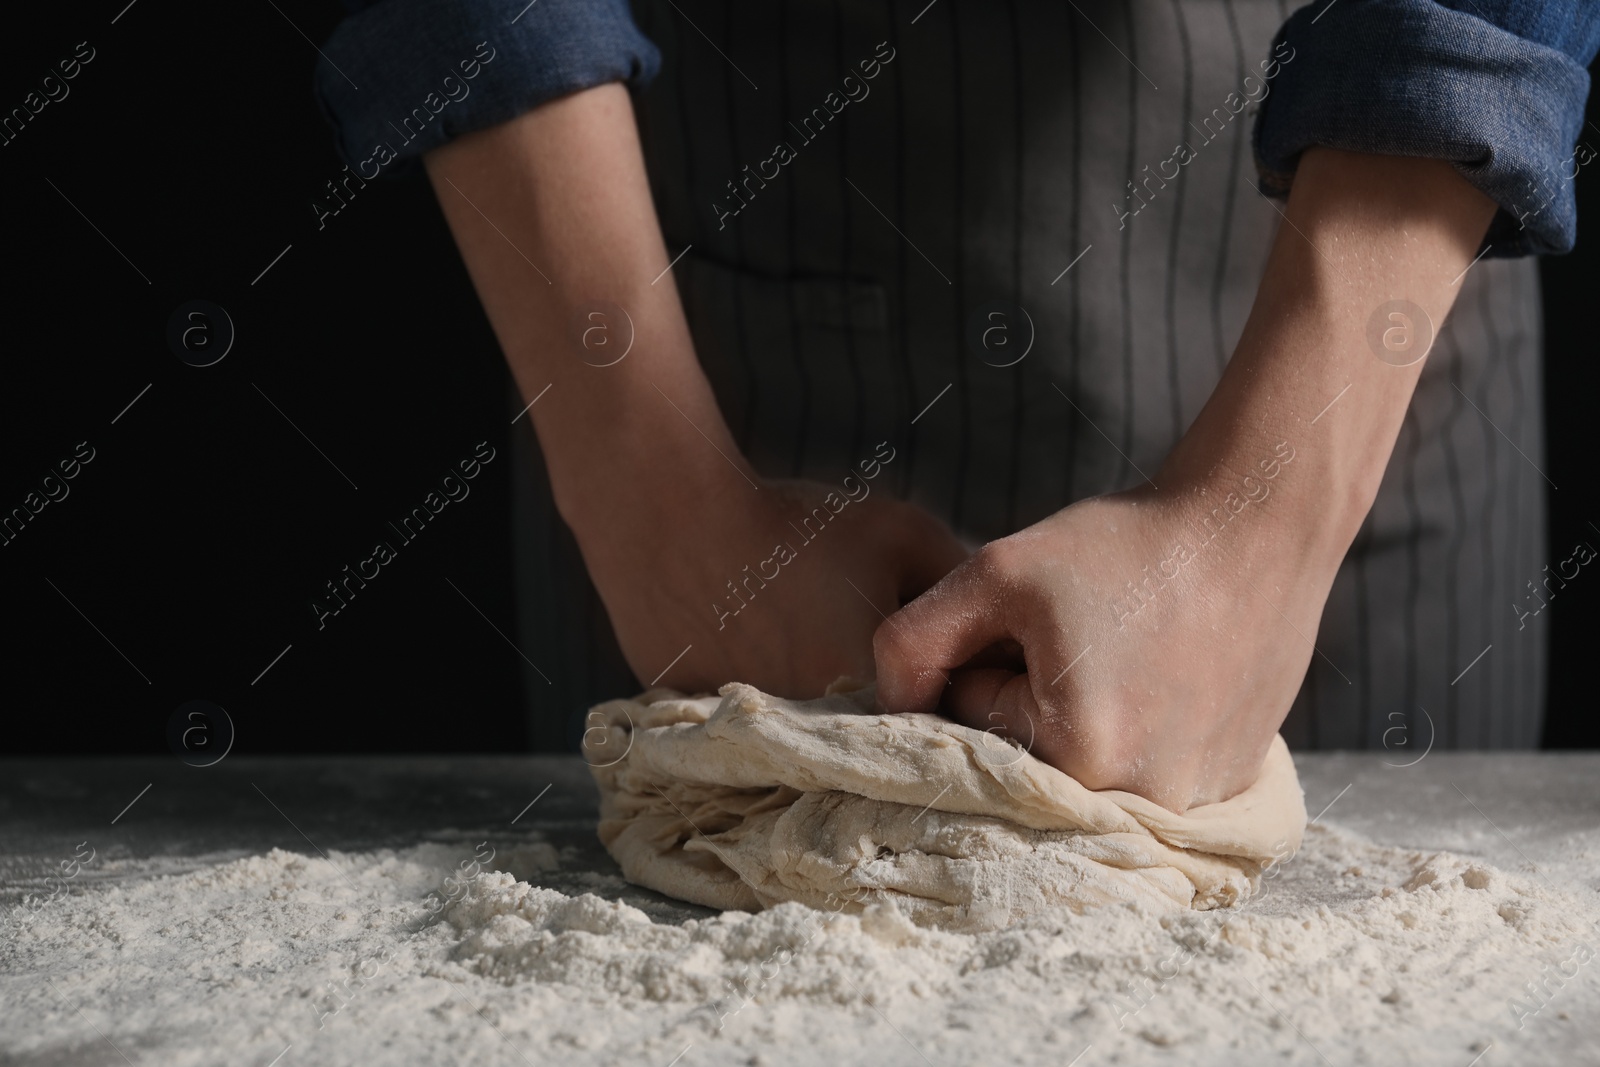 Photo of Making bread. Woman kneading dough at table on dark background, closeup